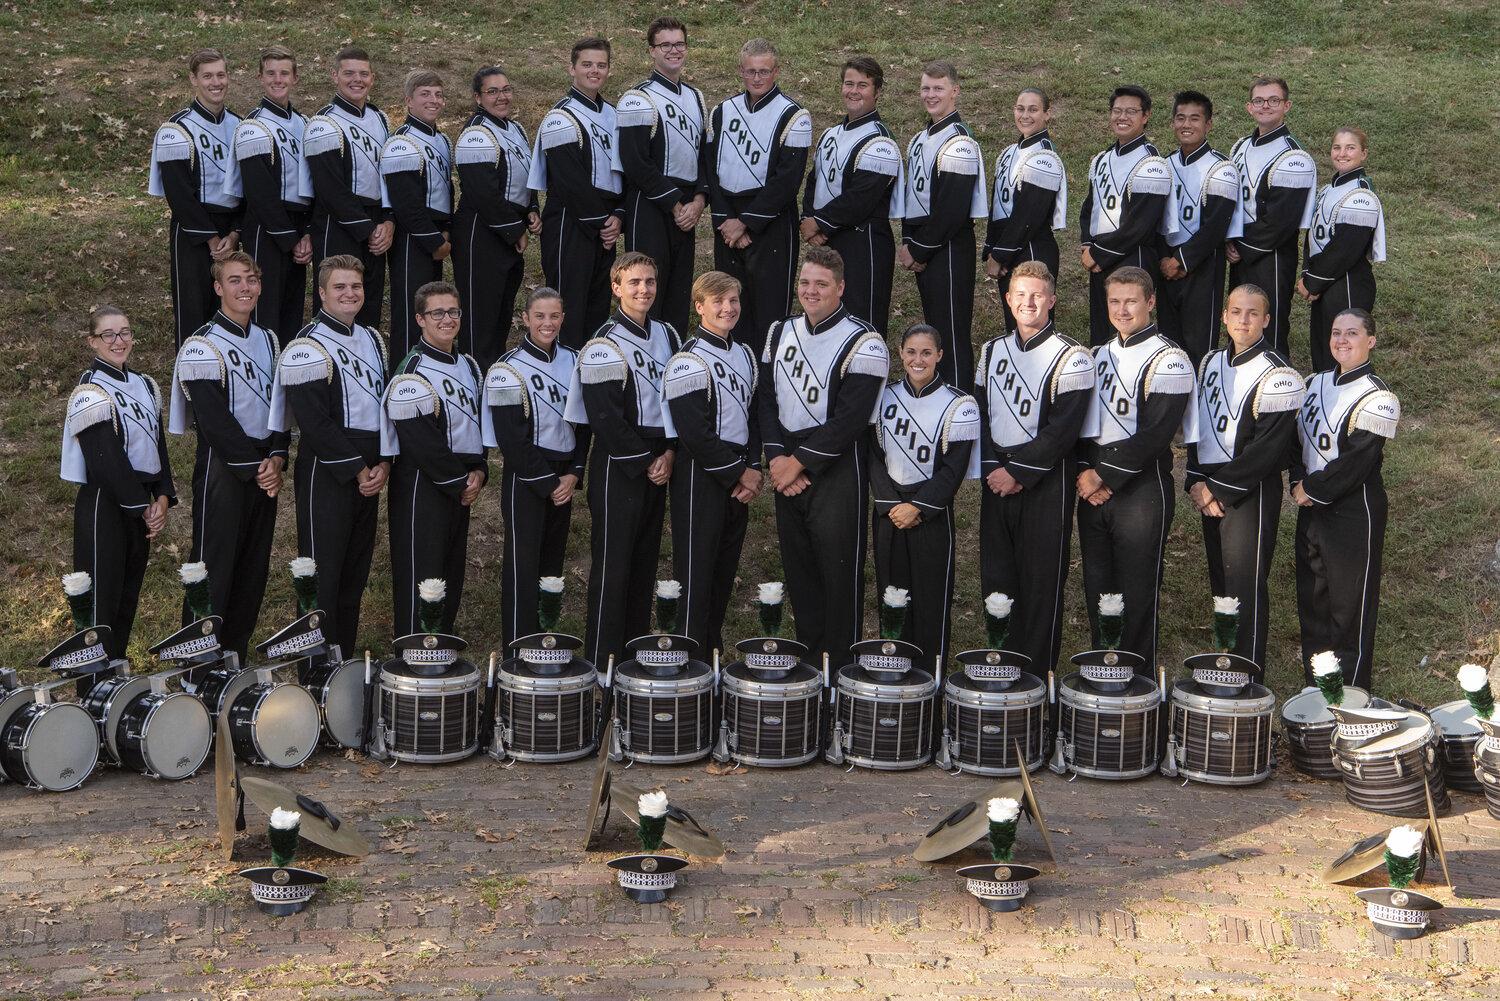 Marching 110 percussion players